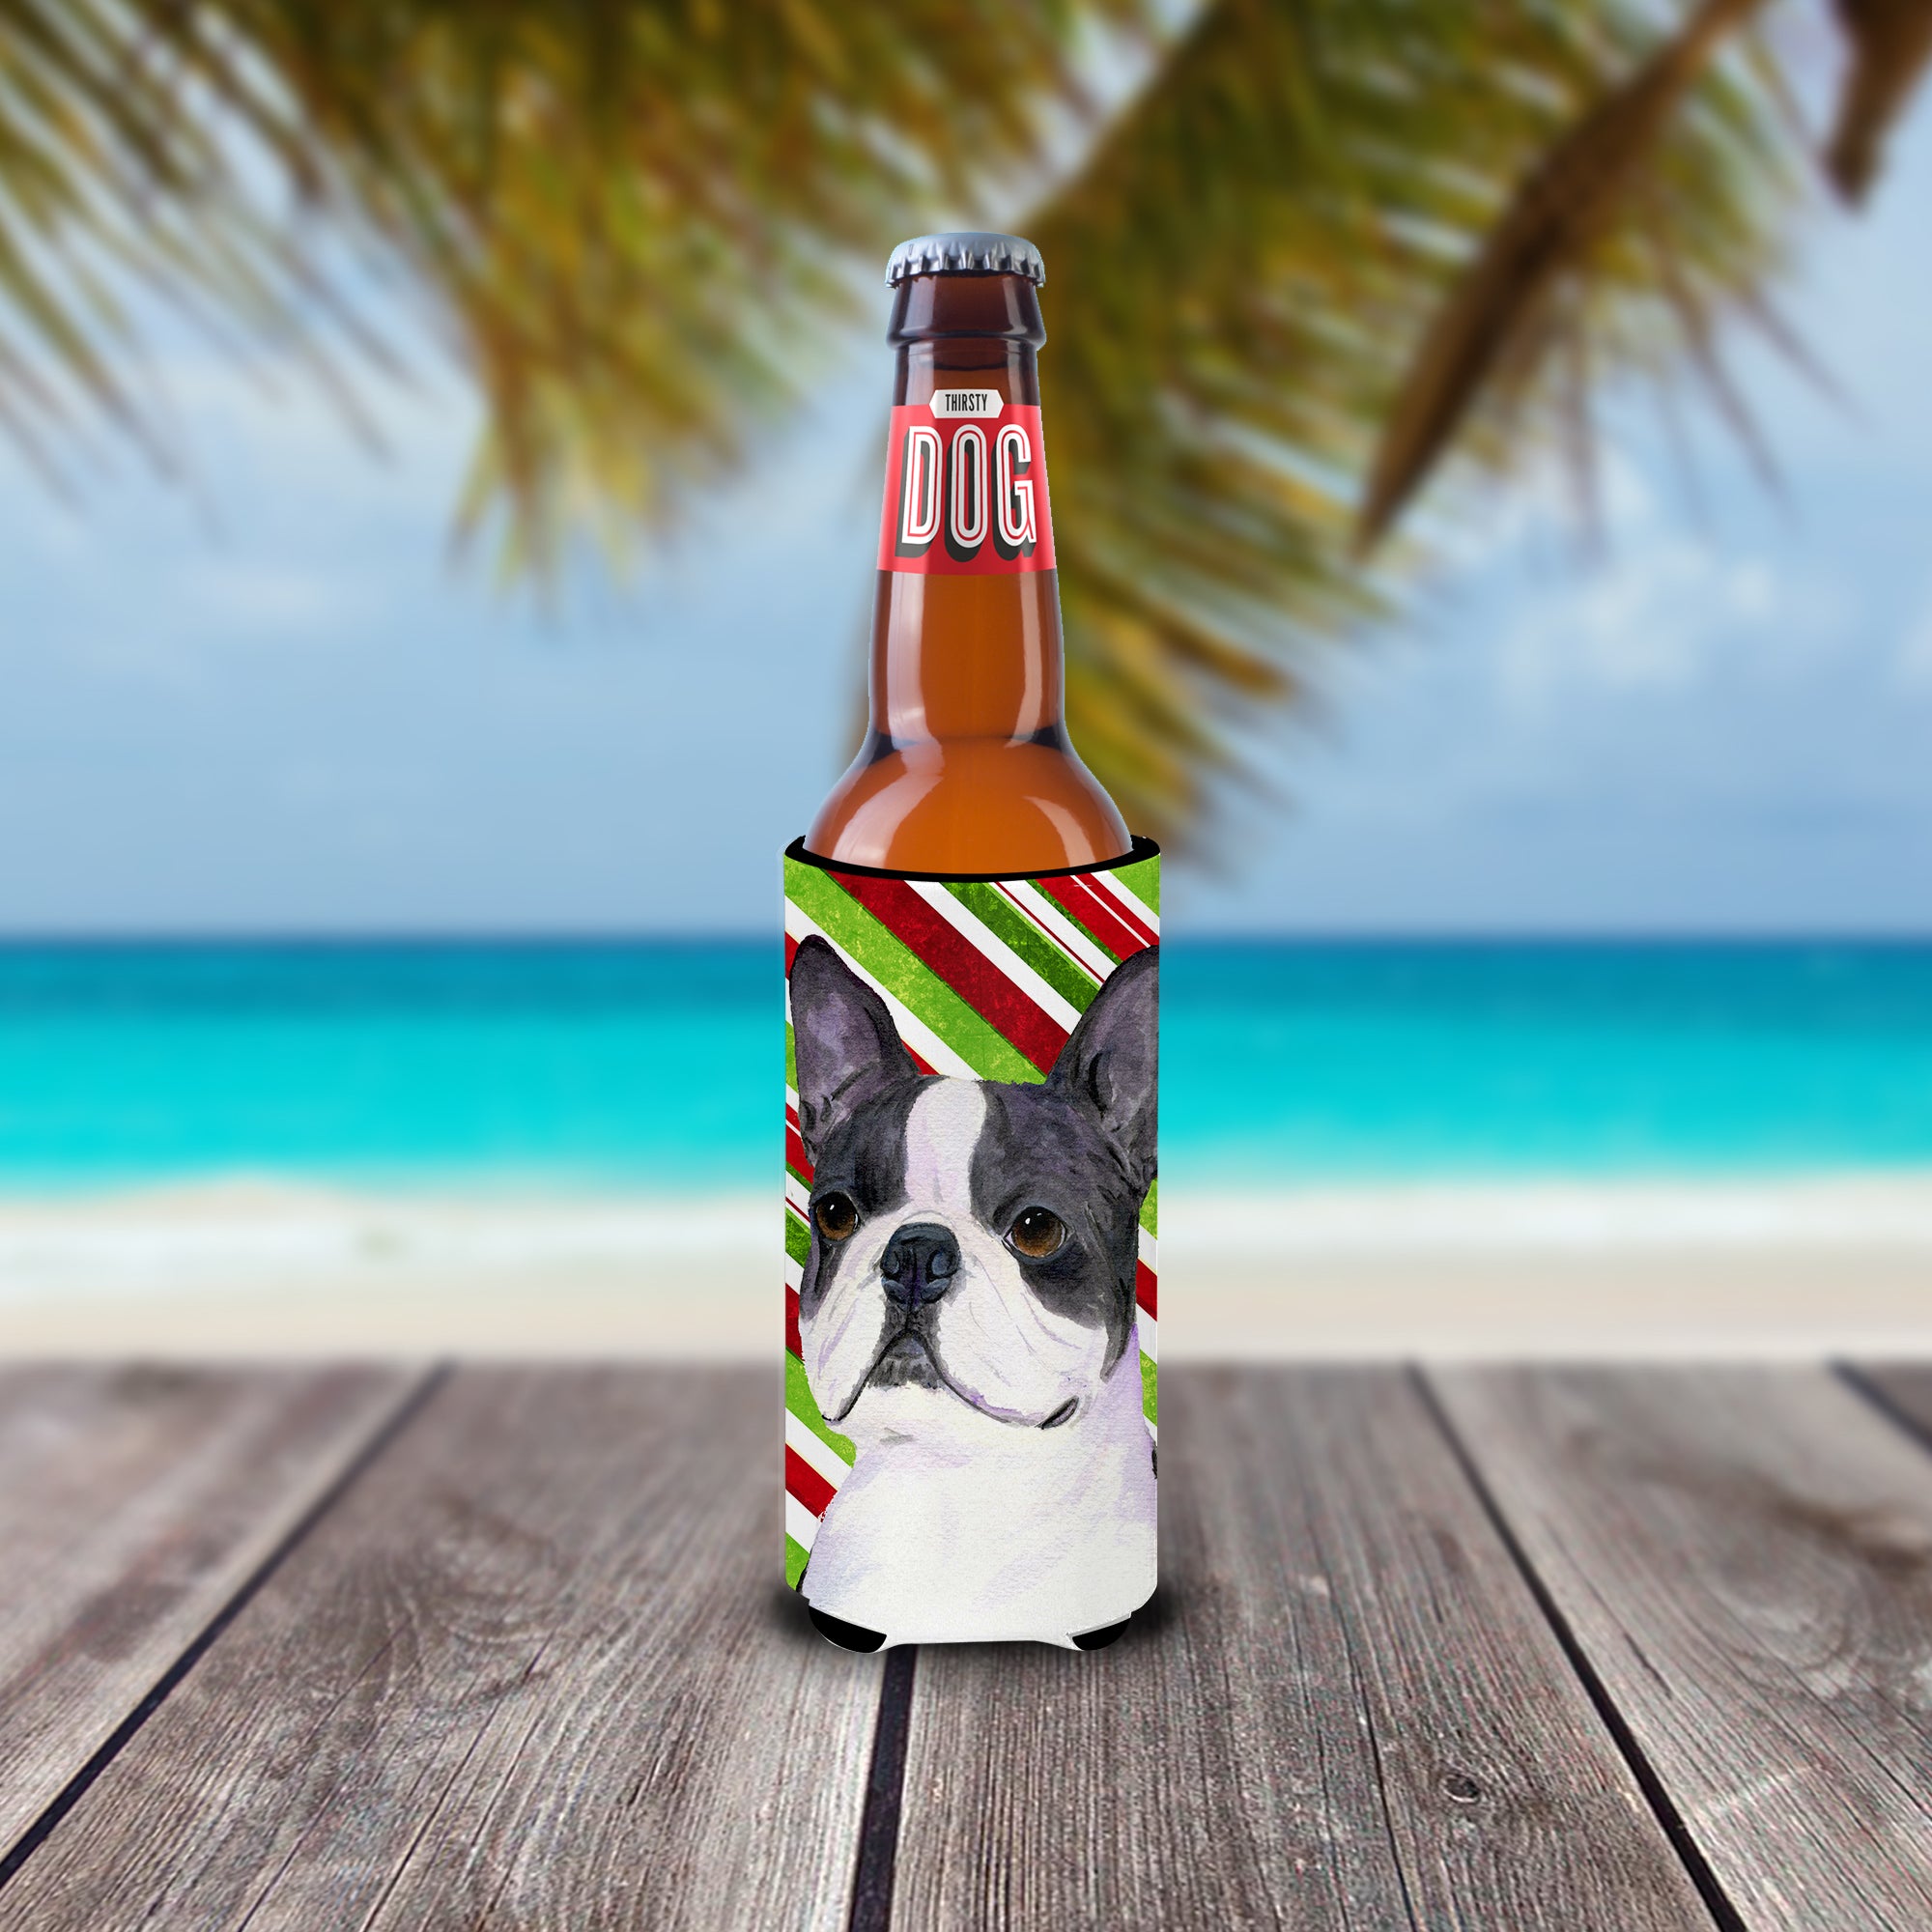 Boston Terrier Candy Cane Holiday Christmas Ultra Beverage Insulators for slim cans SS4585MUK.